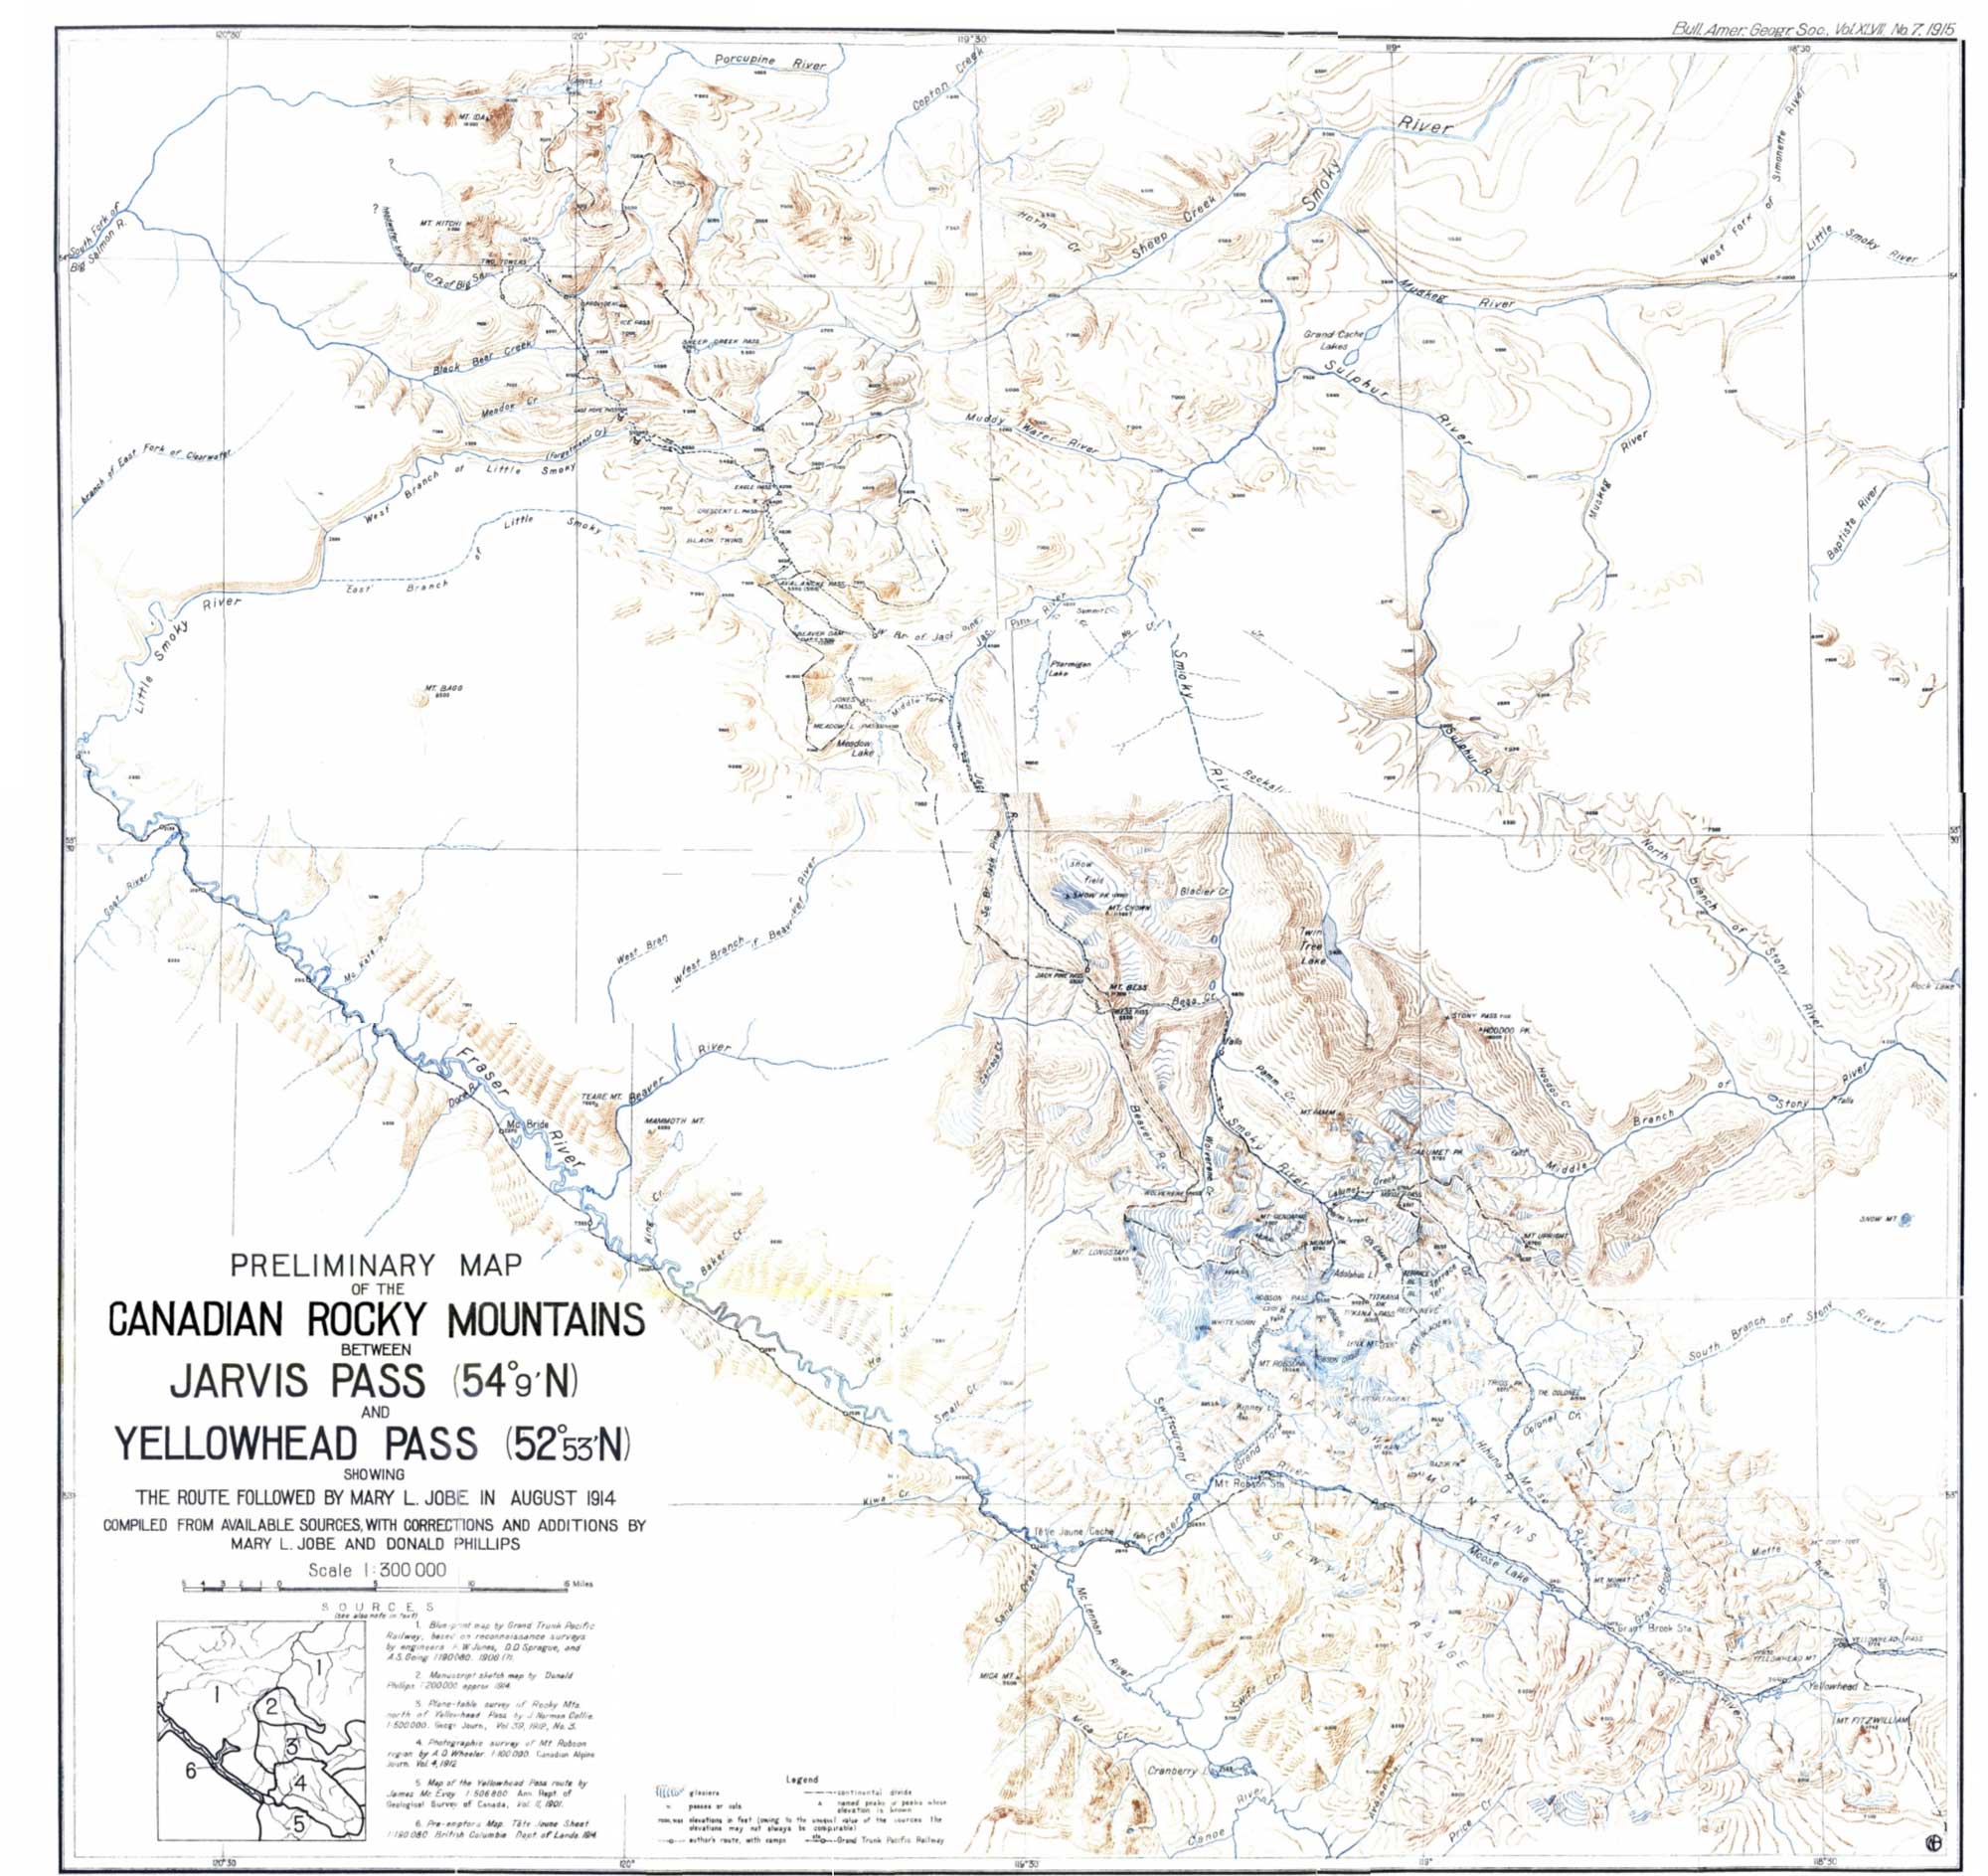 Preliminary Map of the Canadian Rocky Mountains between Jarvis Pass and Yellowhead Pass